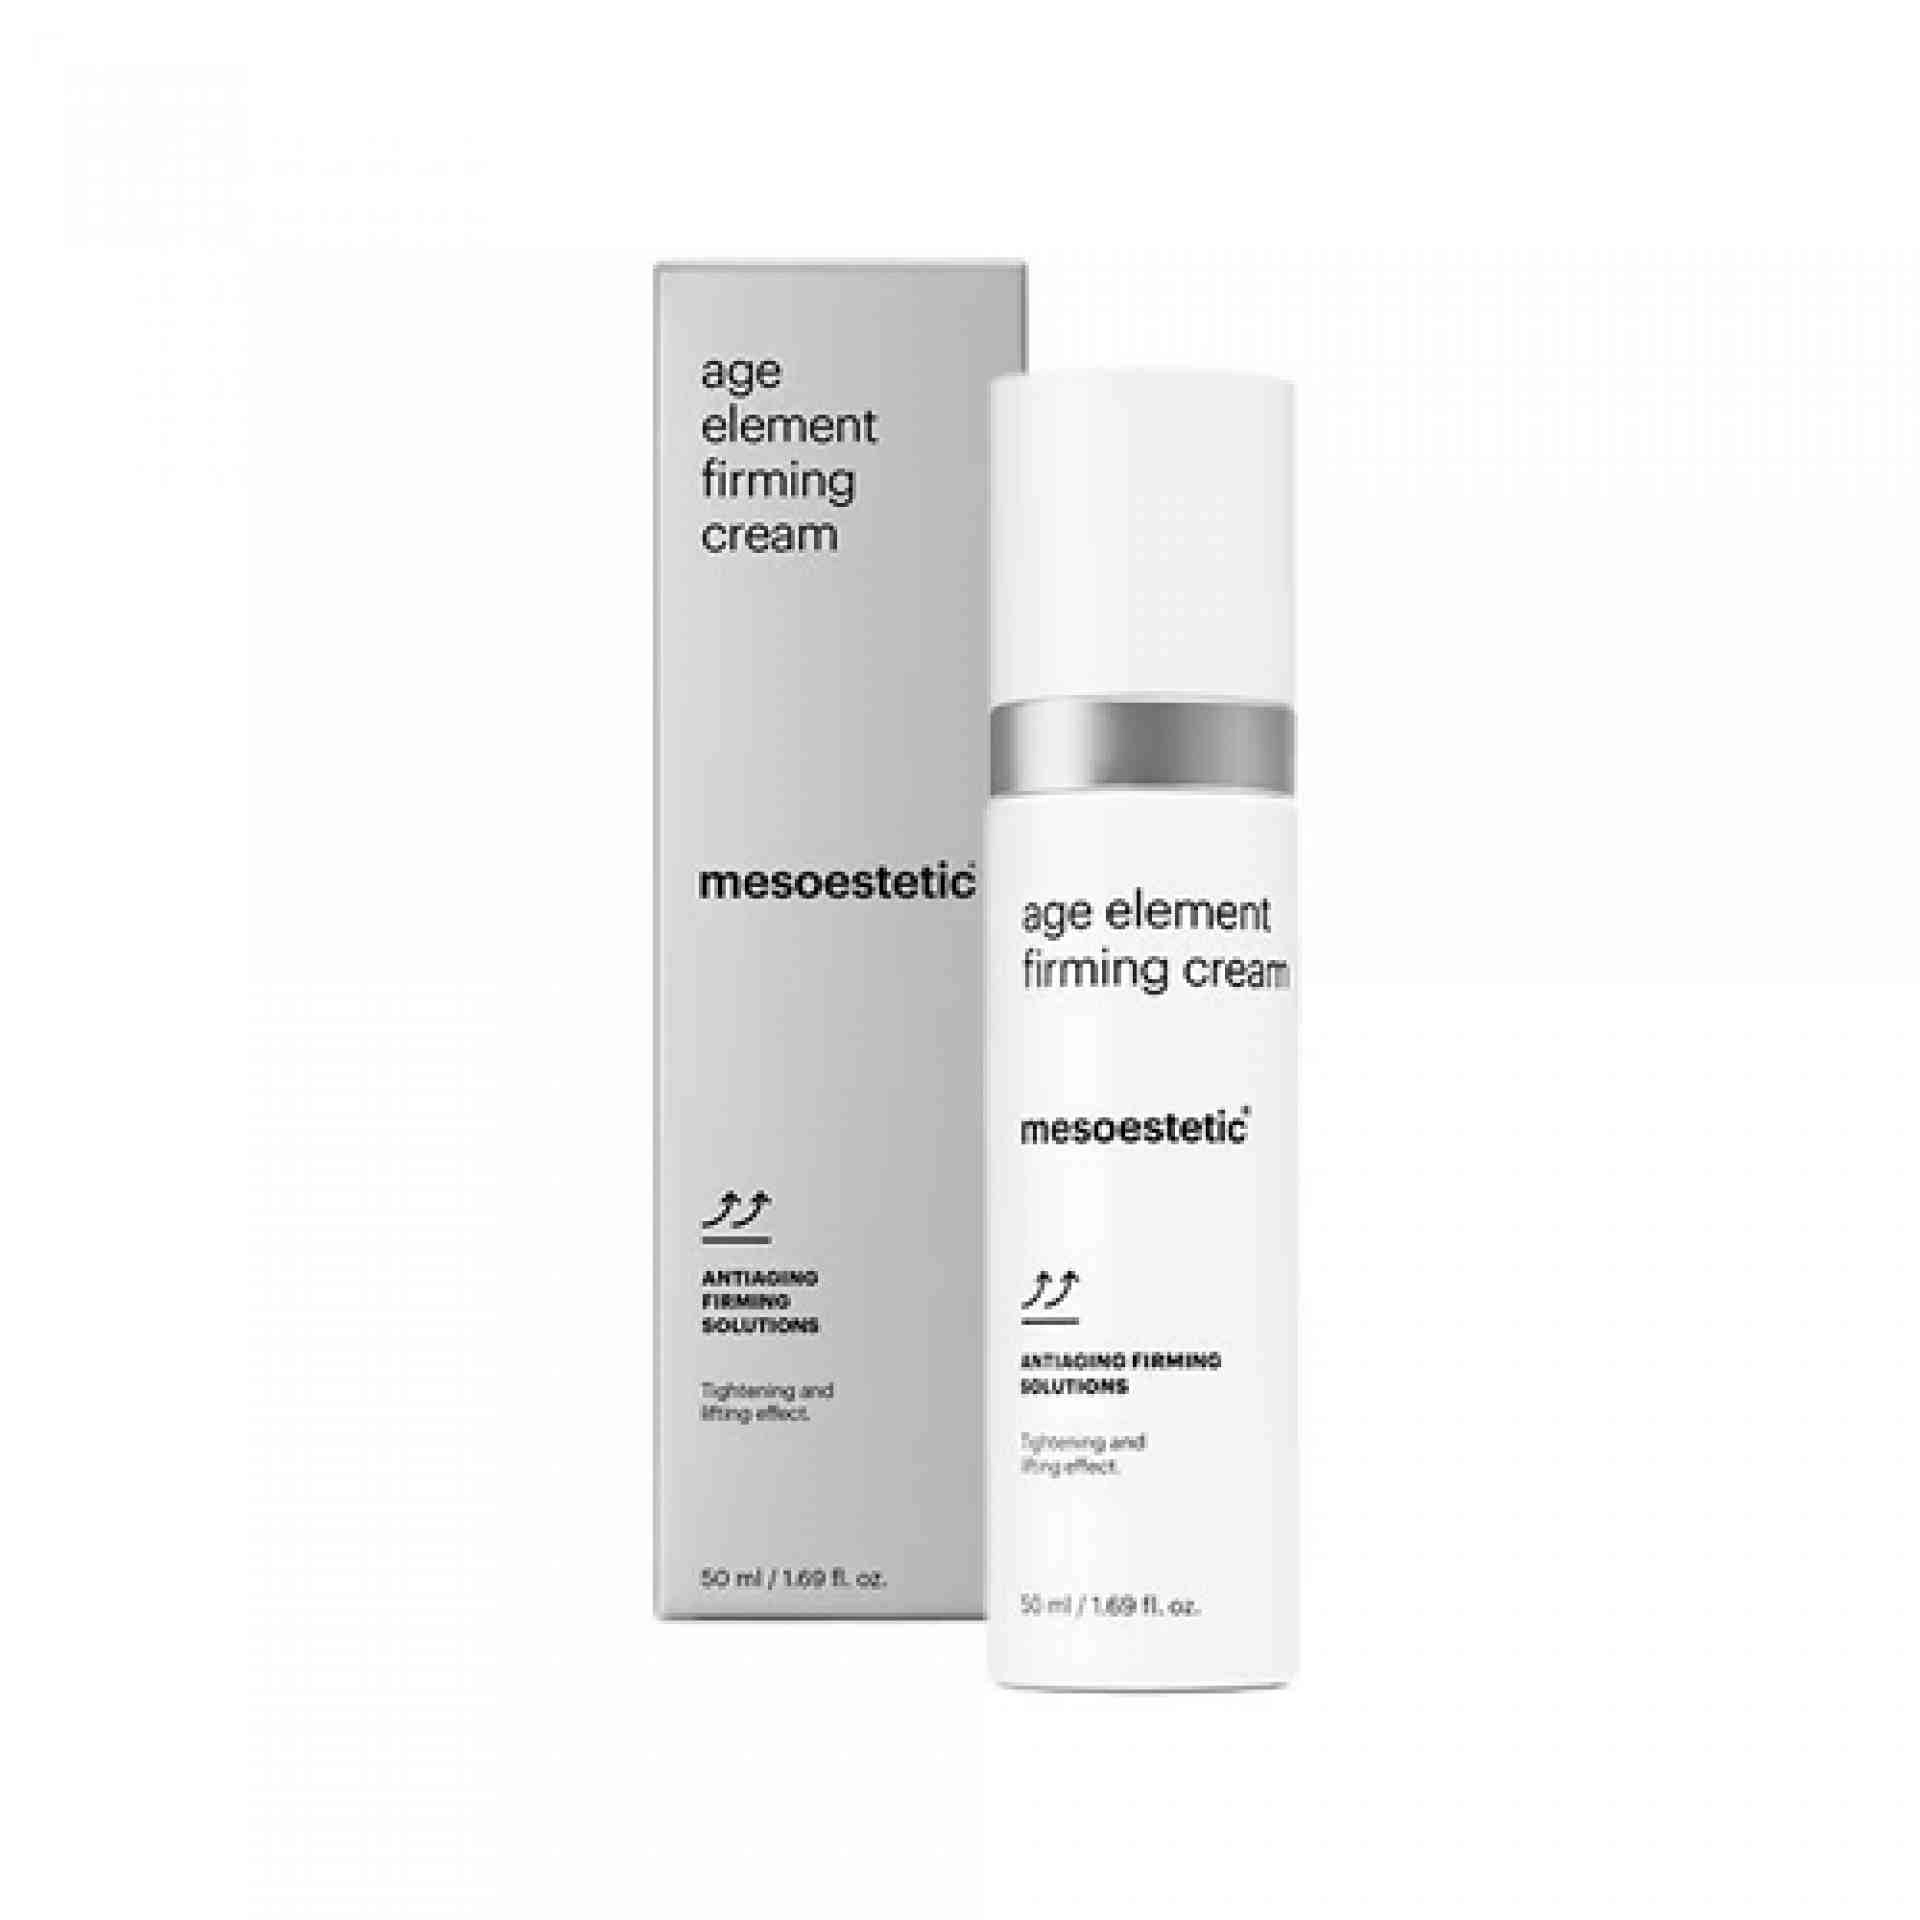 age element firming cream | crema 50ml - antiaging firming solutions - mesoestetic ®